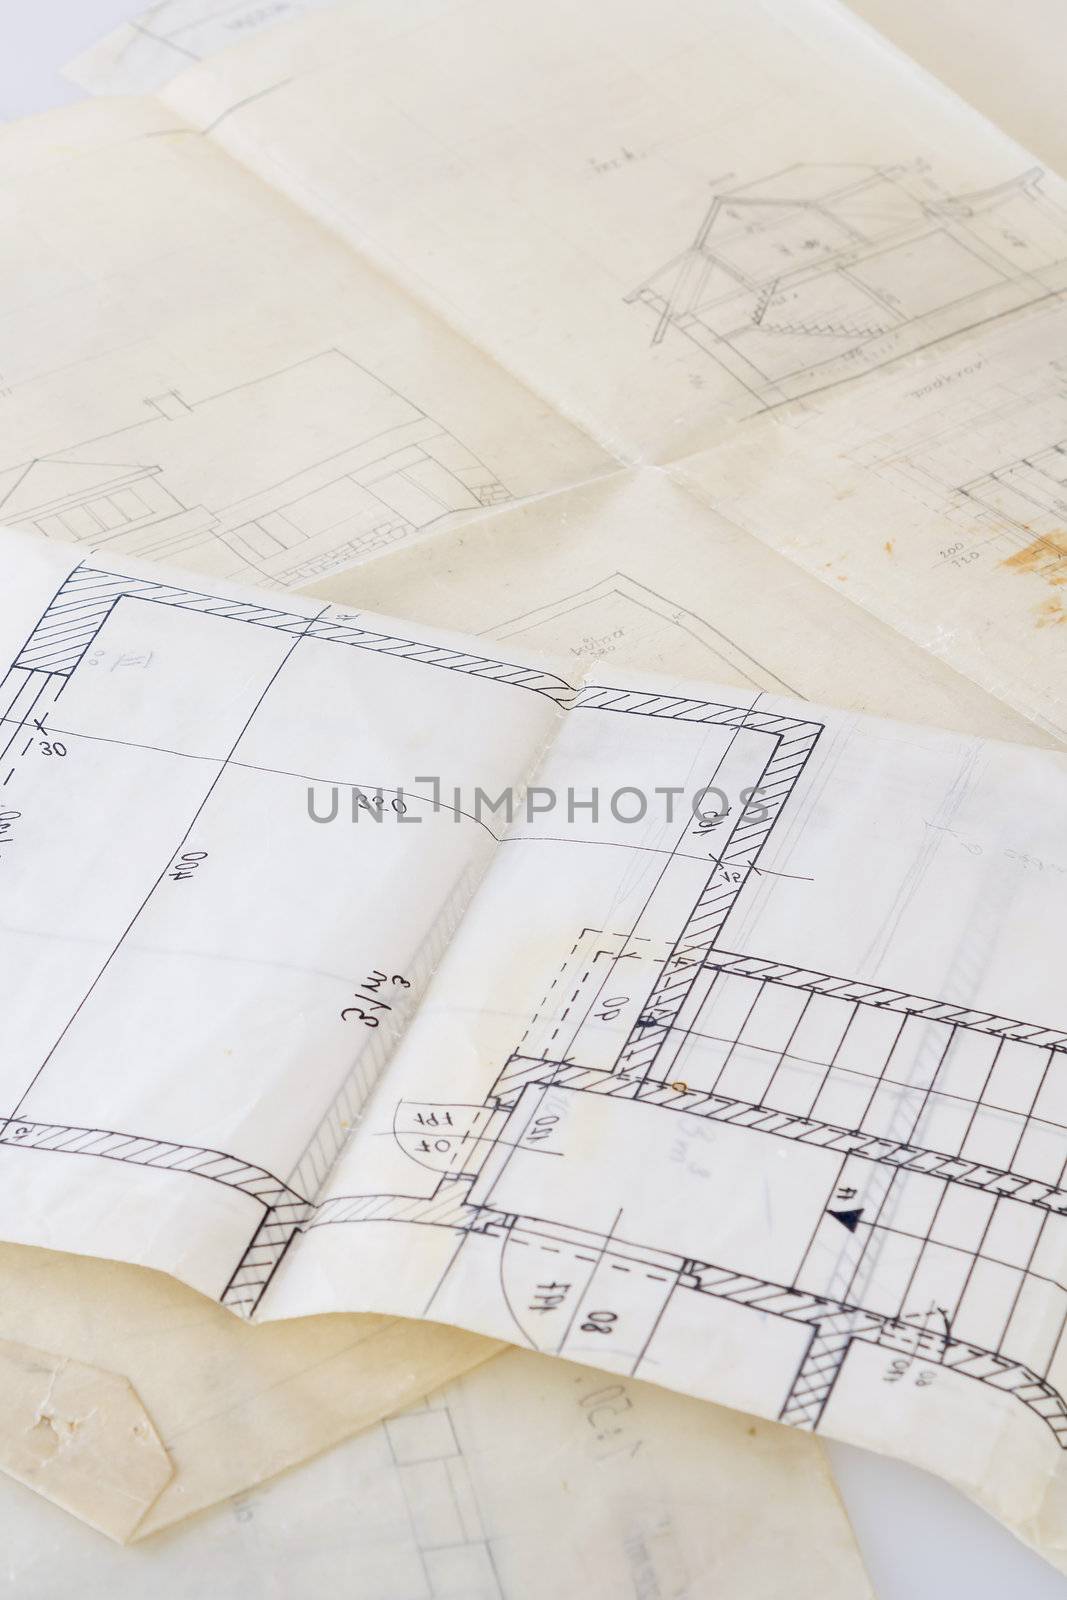 Architectural plans of the old paper tracing paper and file with the project